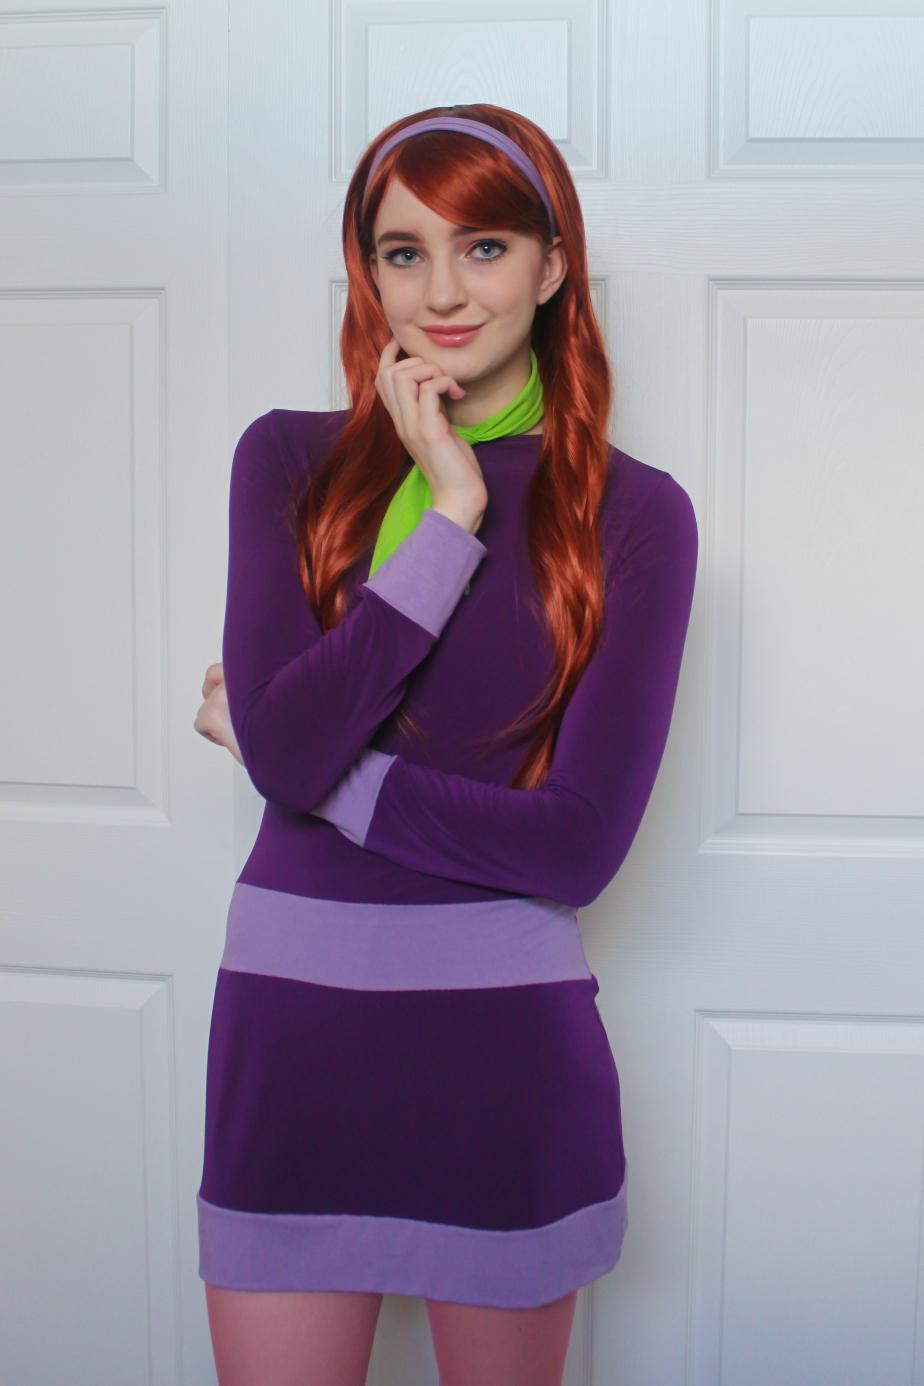 70+ Hot Pictures Of Daphne Blake From Scooby Doo Which Are Sure to Catch Your Attention 50